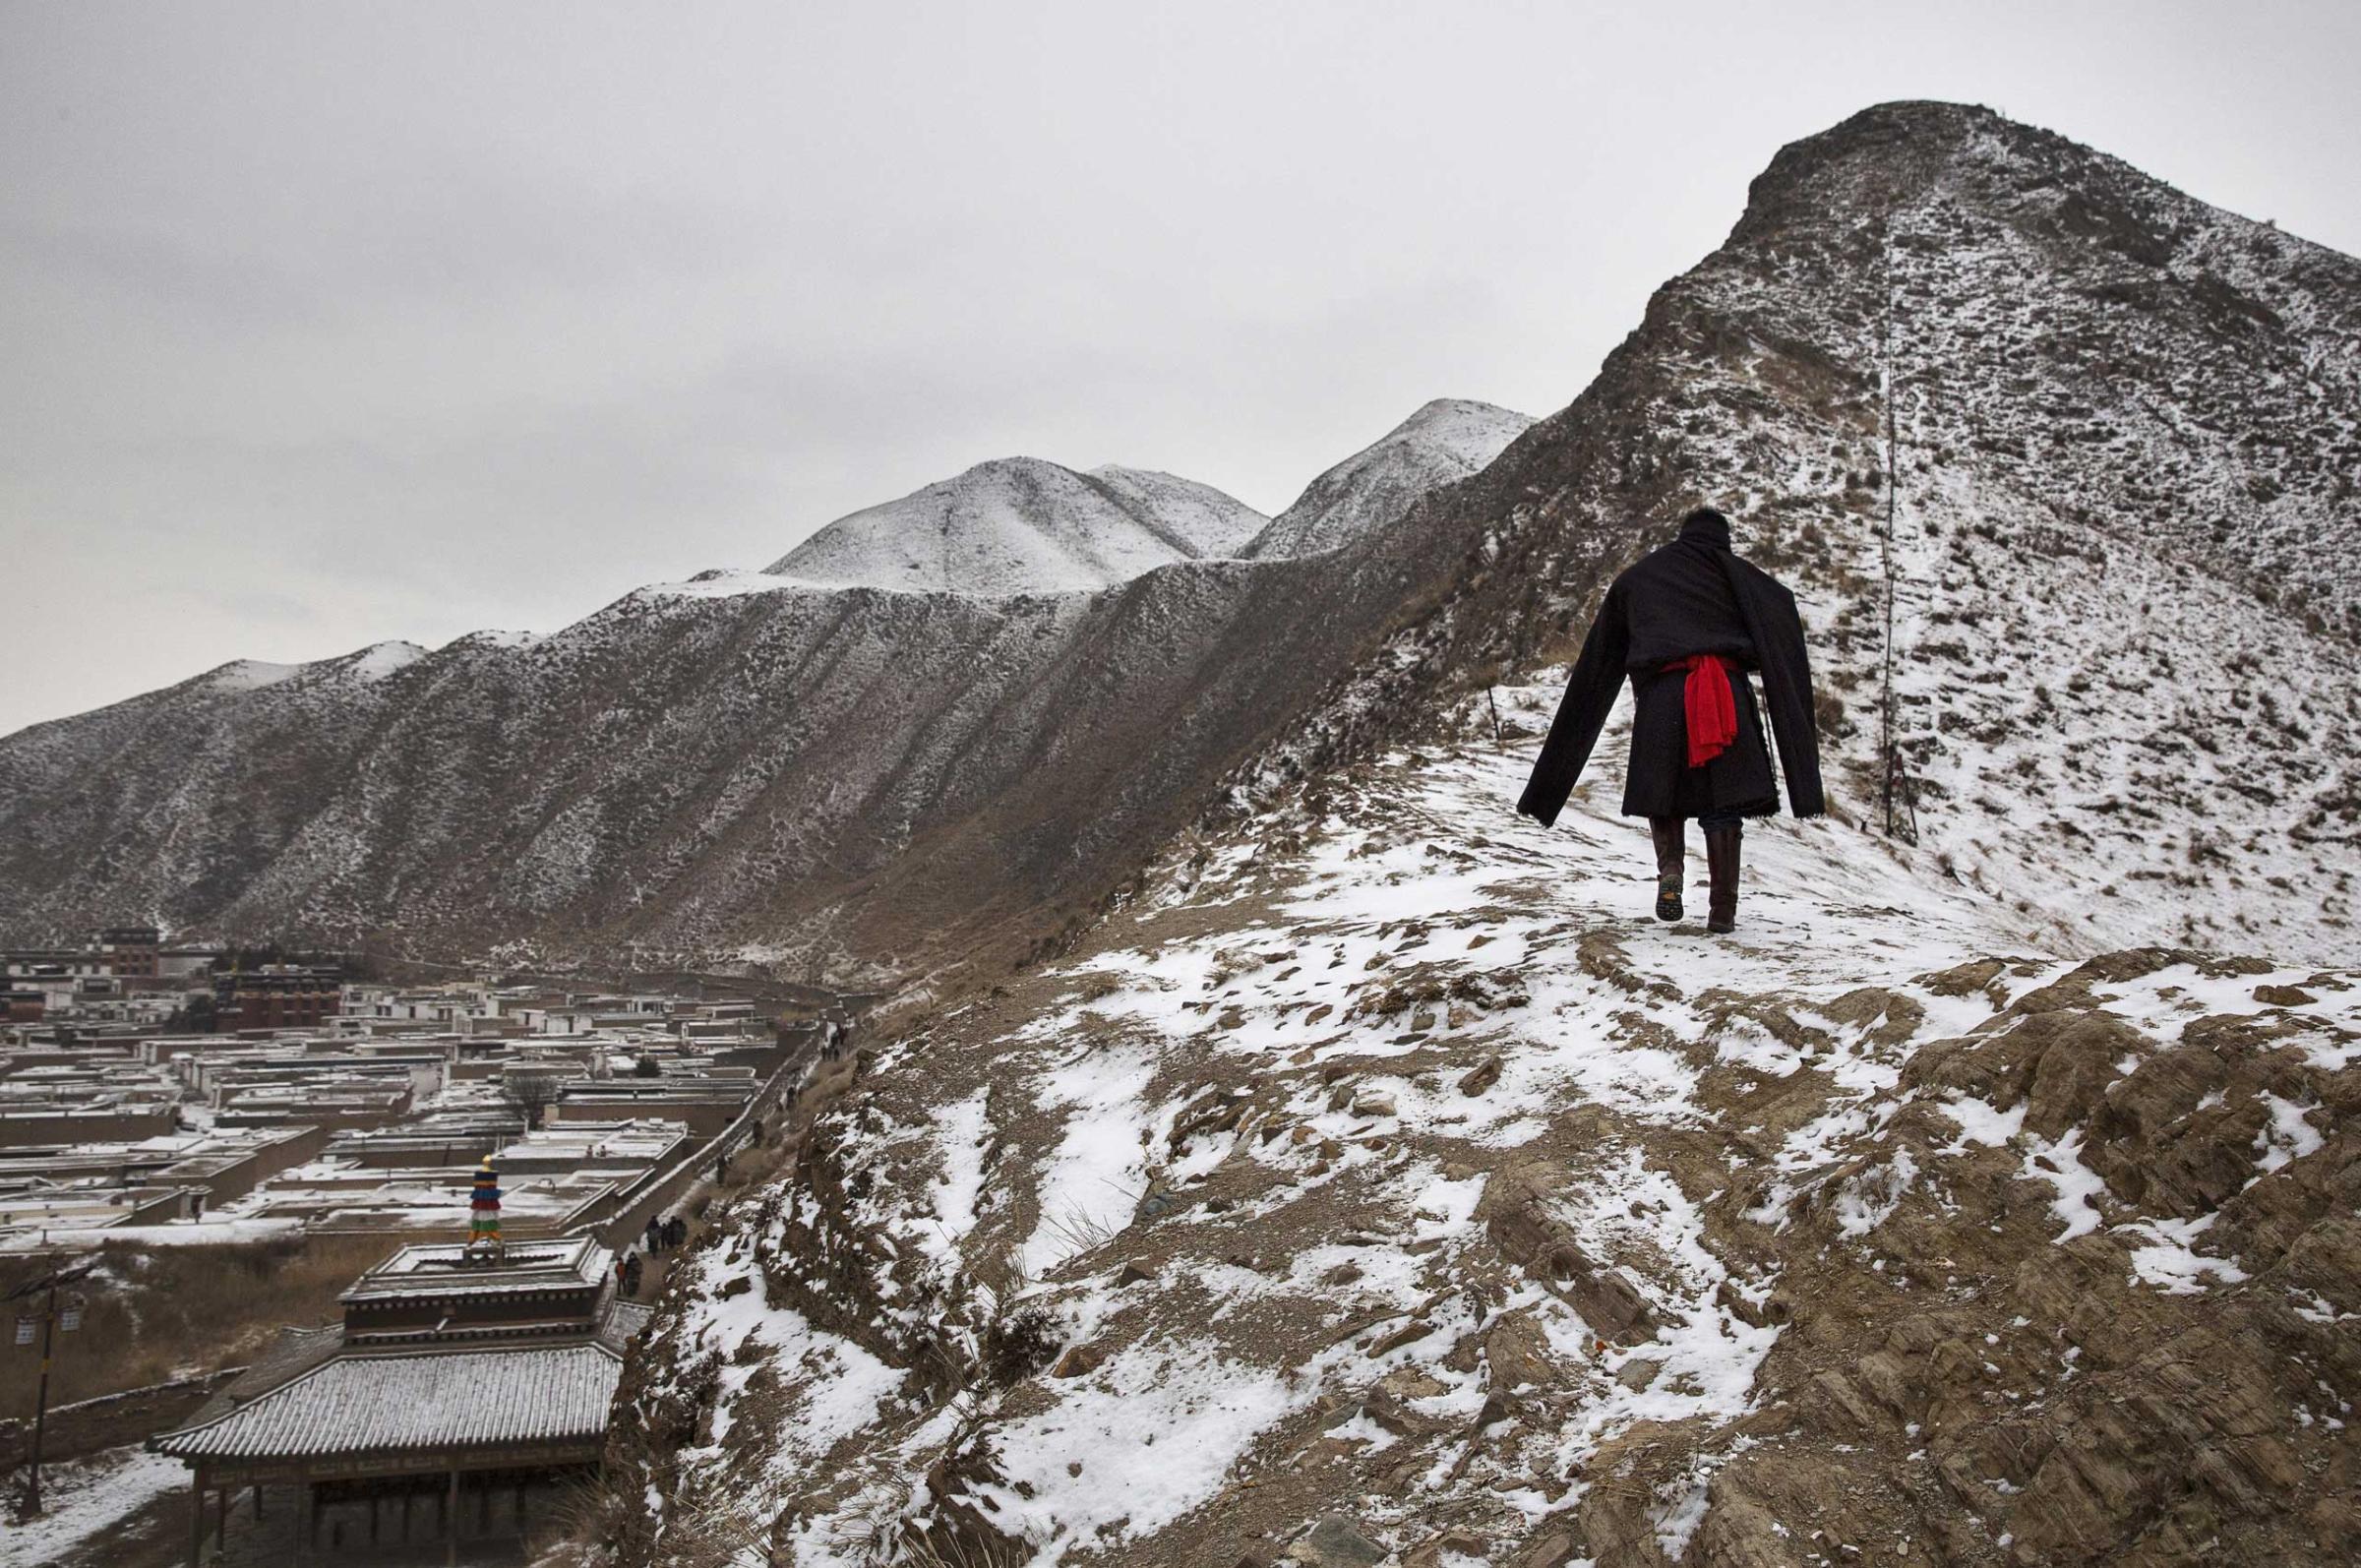 A Tibetan Buddhist man wears a traditional jacket as he walks on a hillside during Monlam or the Great Prayer rituals on March 4, 2015 overlooking the Labrang Monastery.